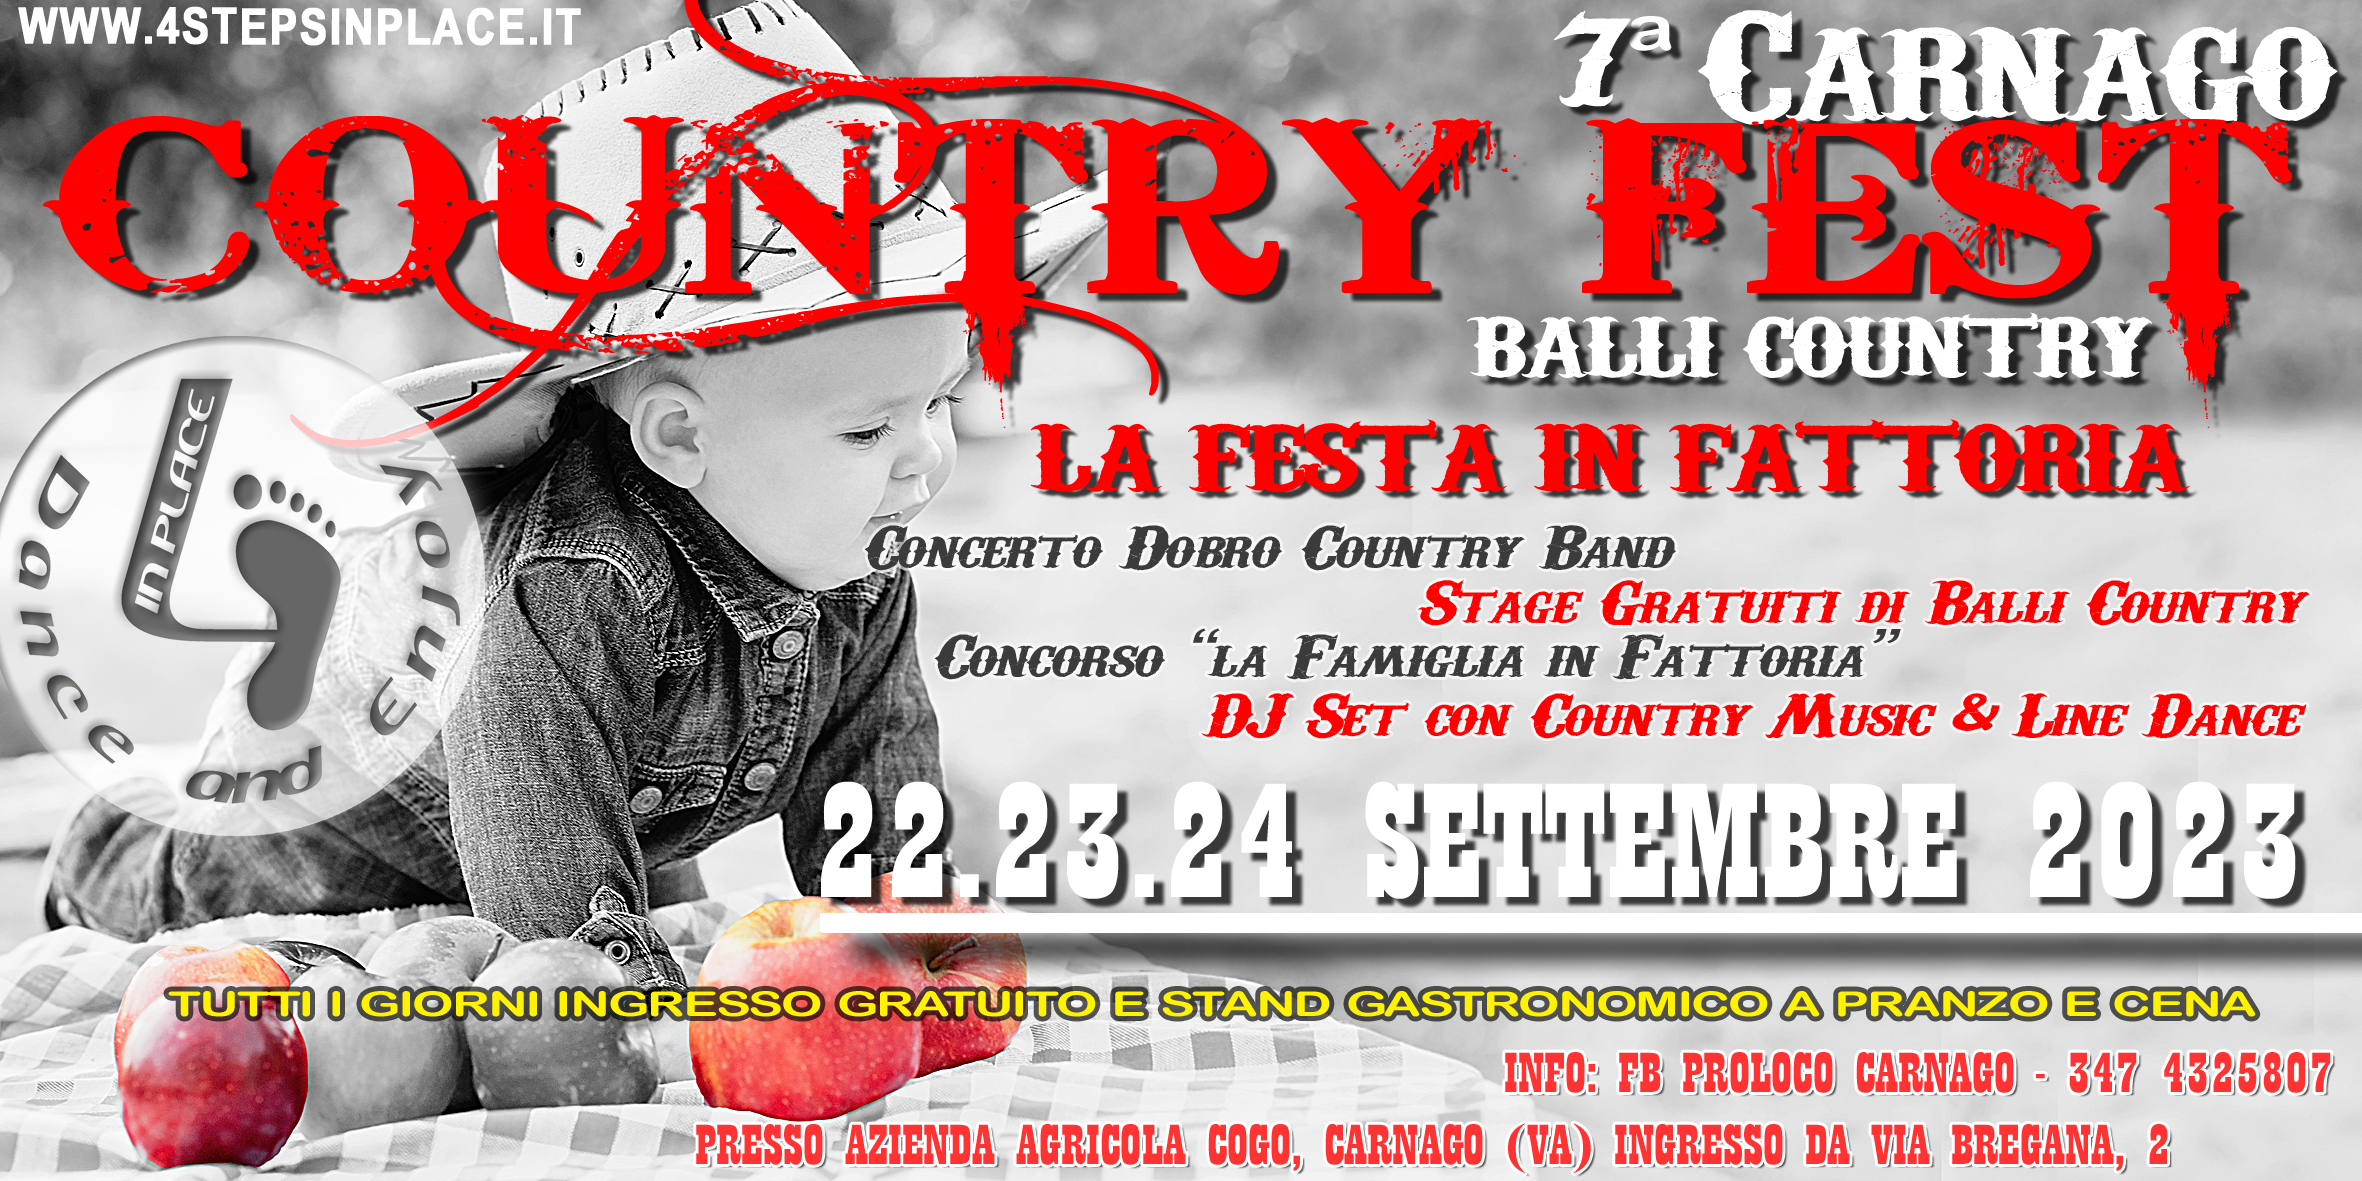 22 - 23 - 24 Settembre 2023: 7^ CARNAGO COUNTRY FEST!!!